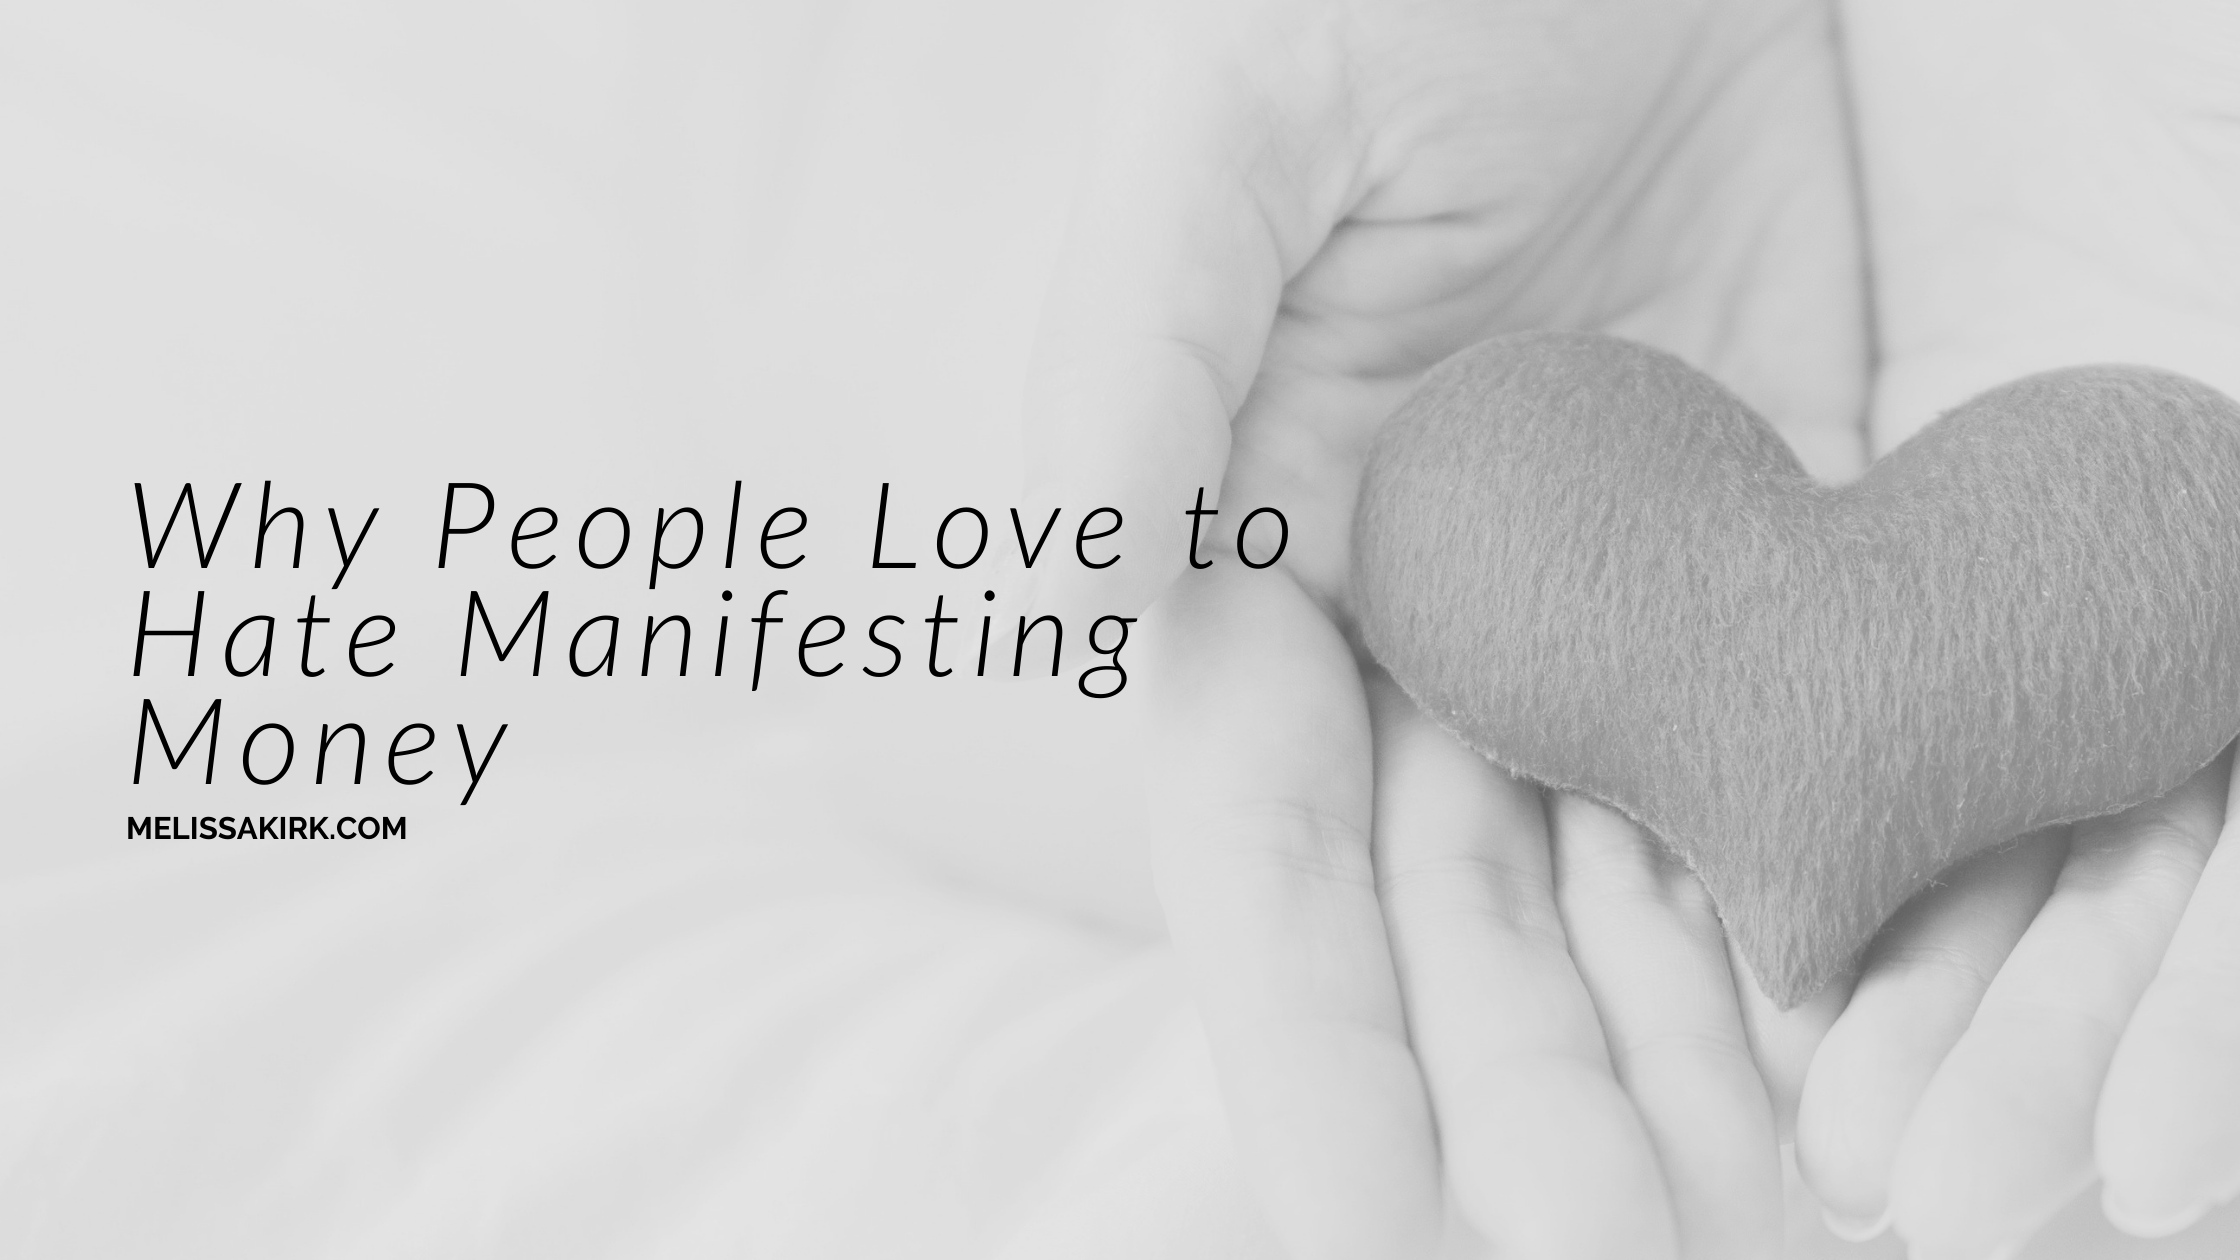 Why People Love to Hate Manifesting Money